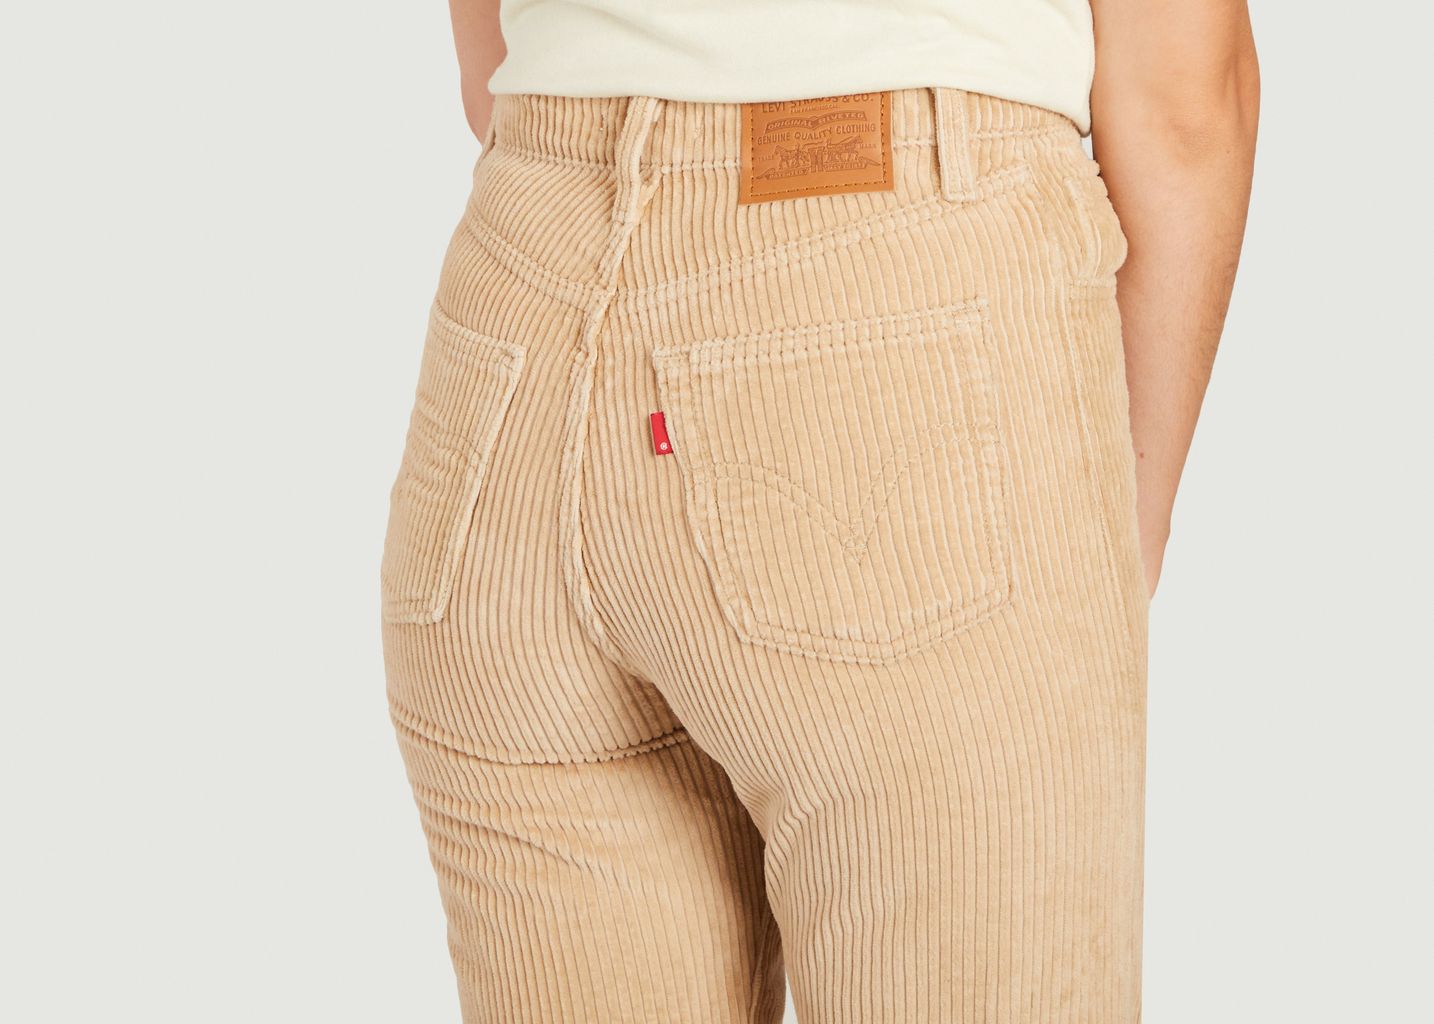 Jeans Ribcage Str Ankle - Levi's Red Tab